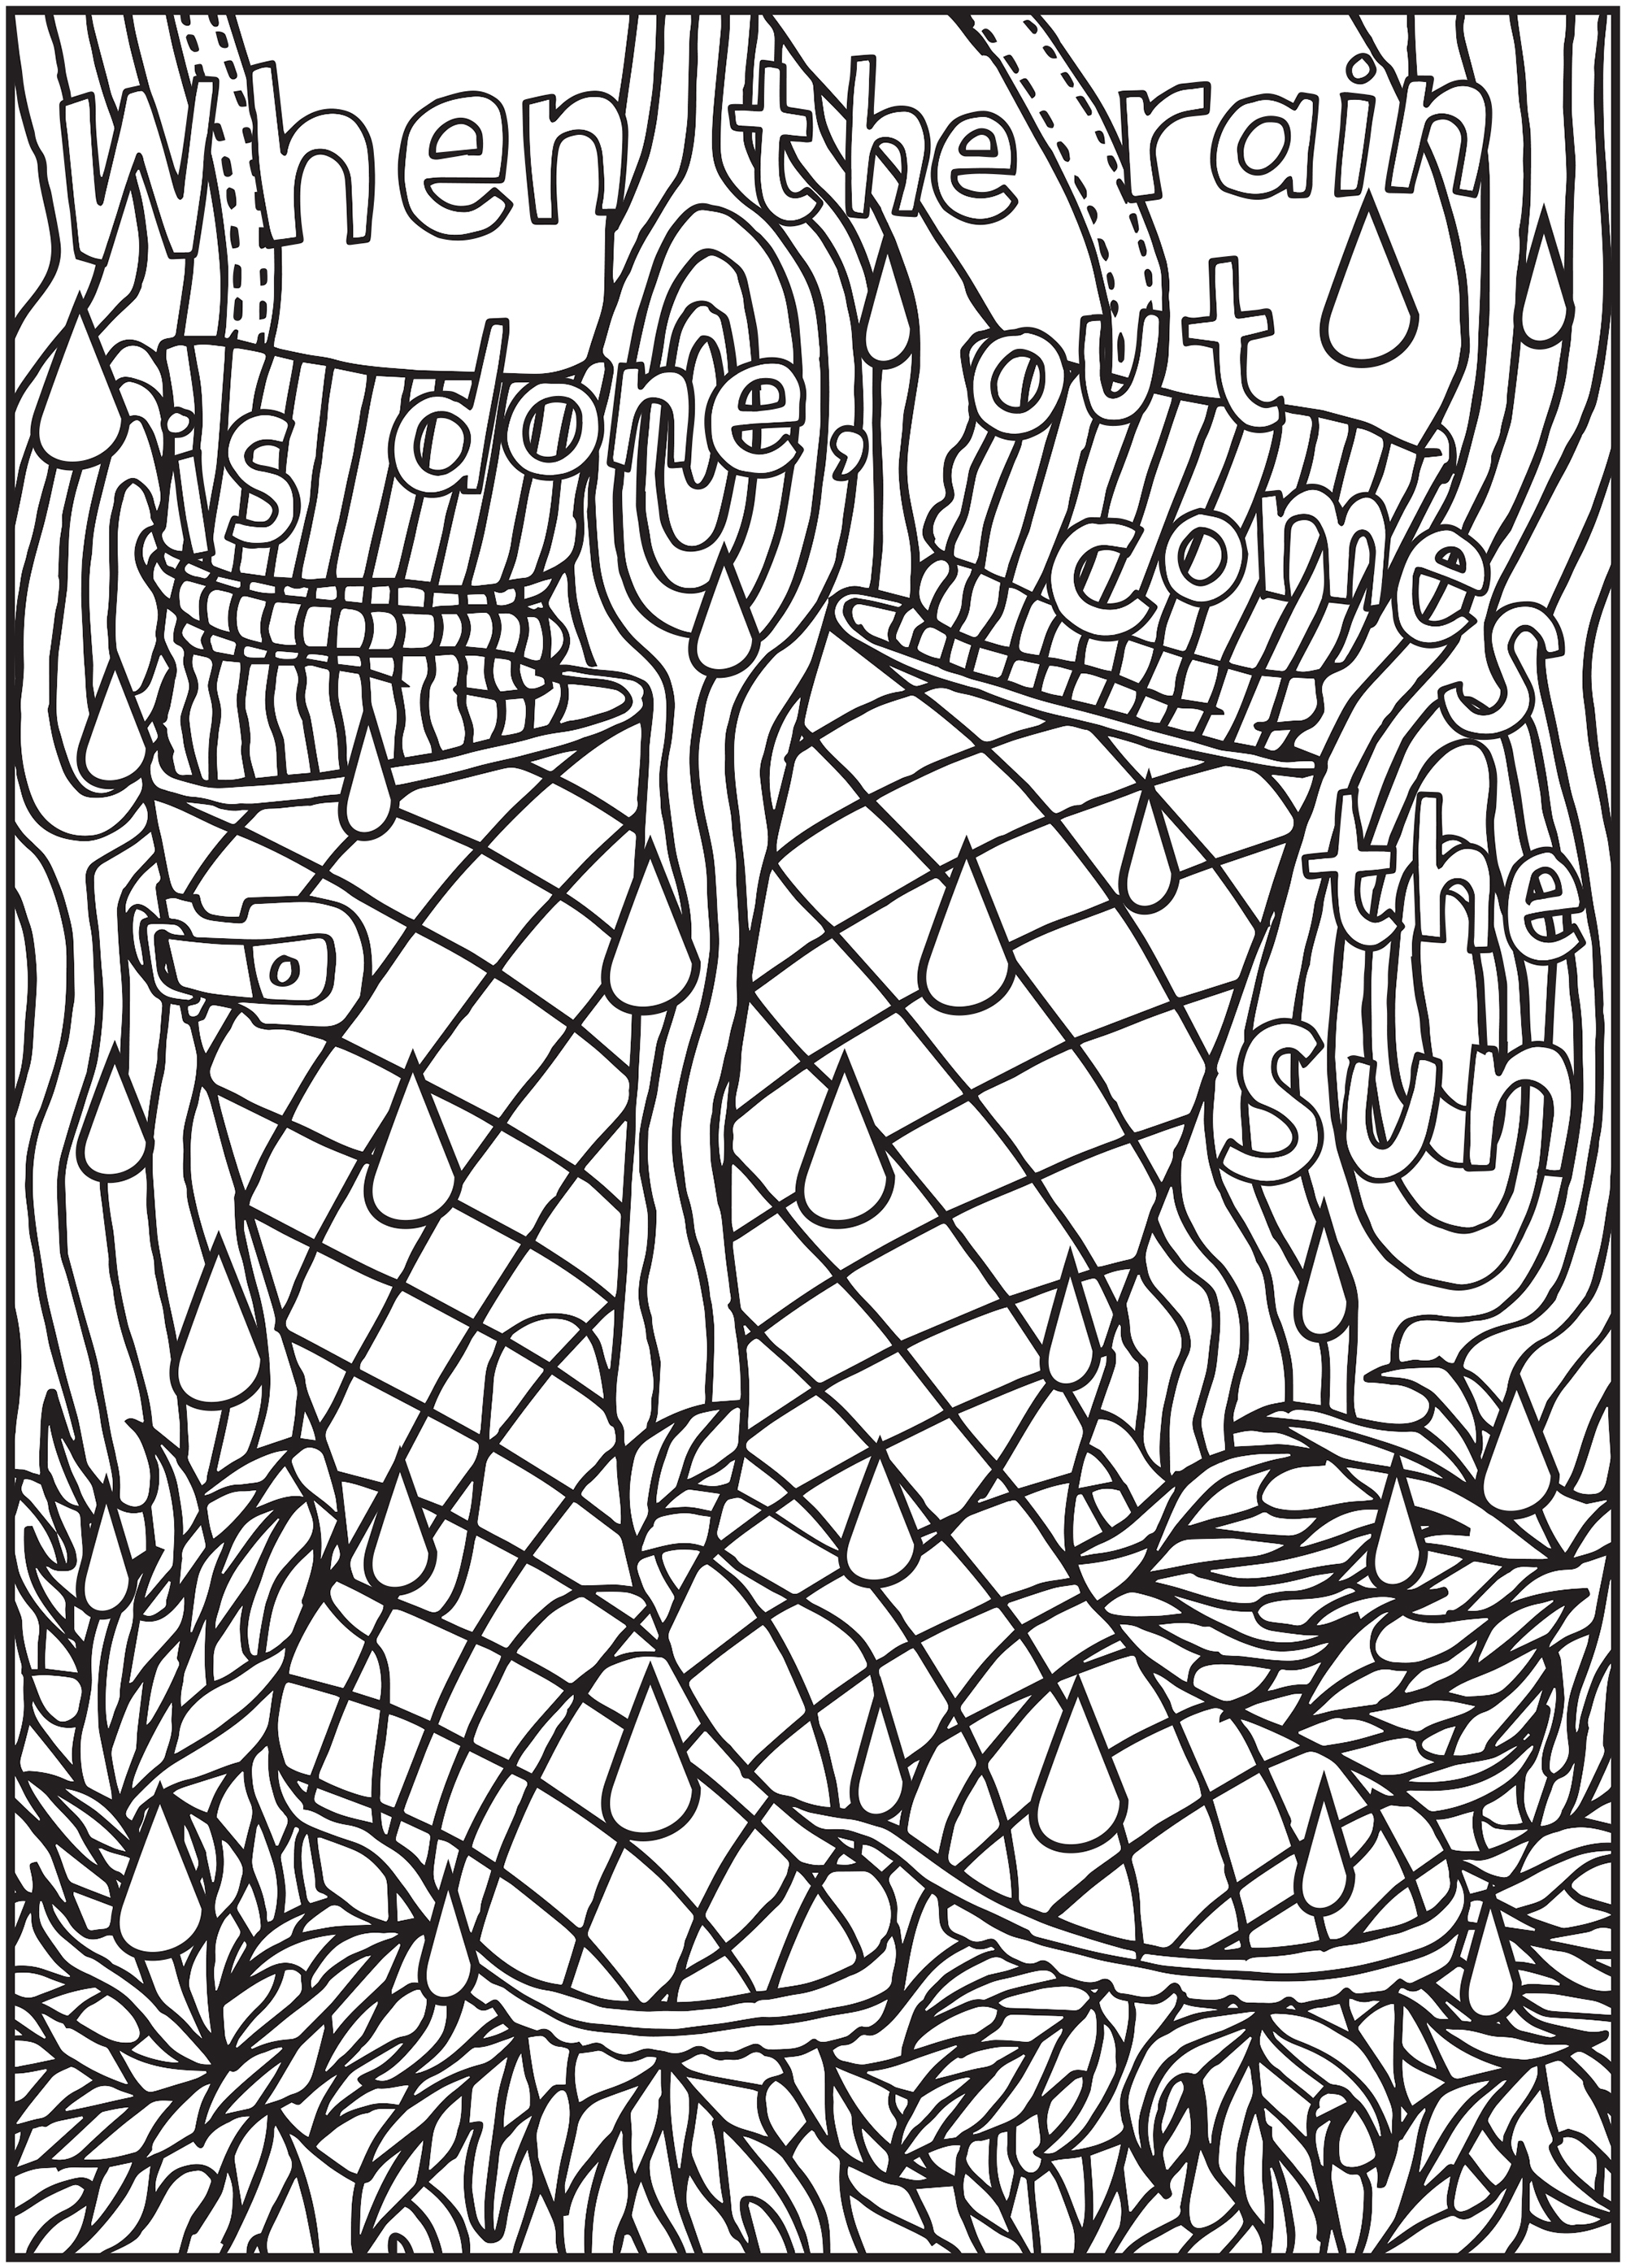 Cra-Z-Art Timeless Creations Adult Coloring Book, Words to Color by, 64 Pages - image 3 of 11